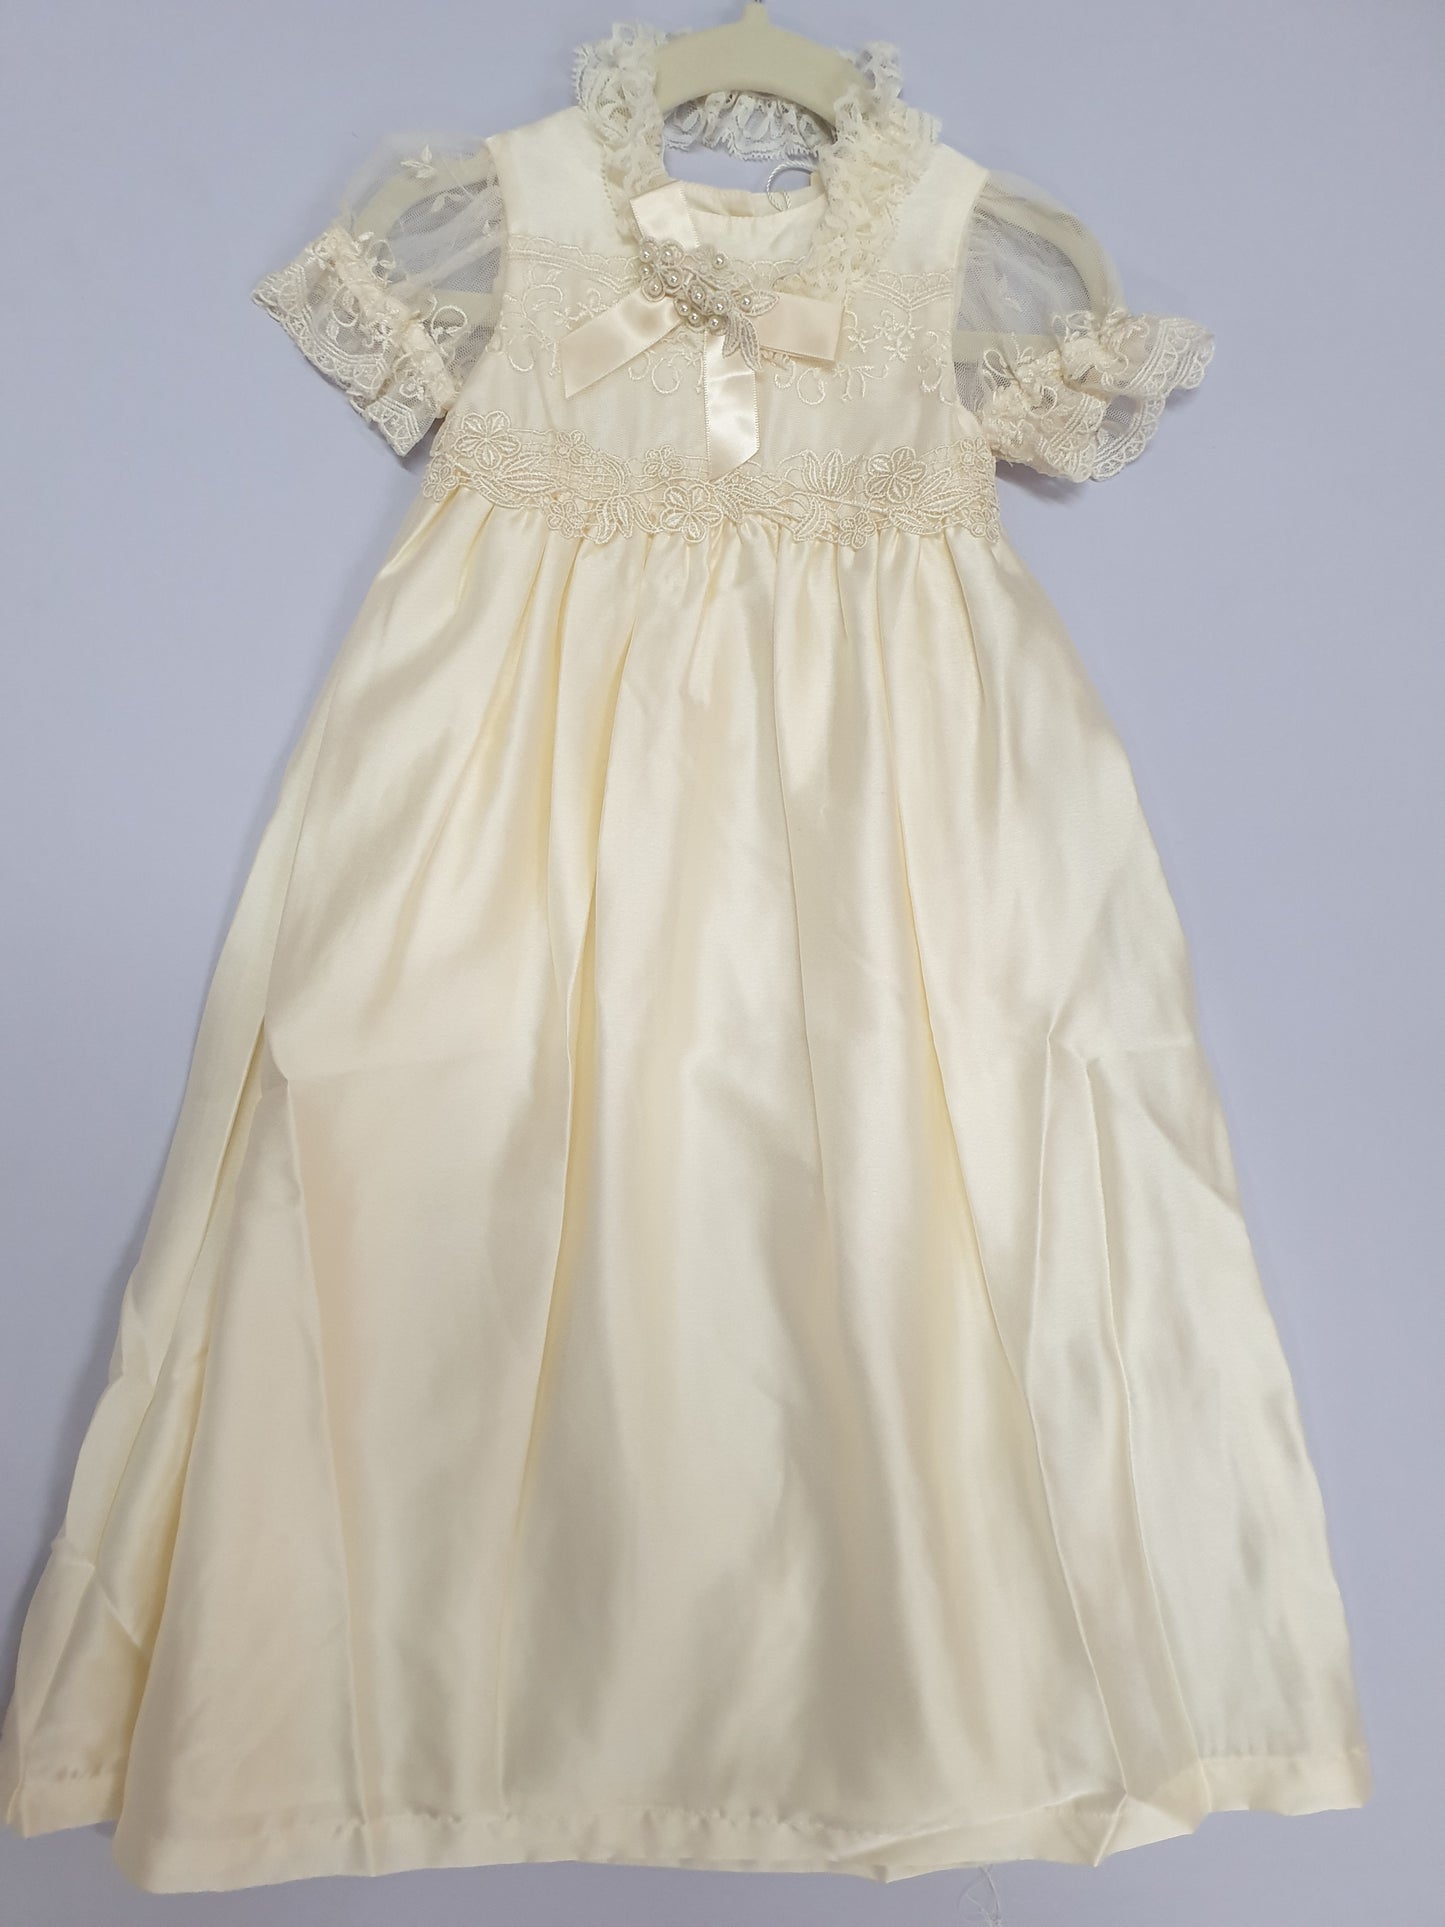 Vintage lace christening gown